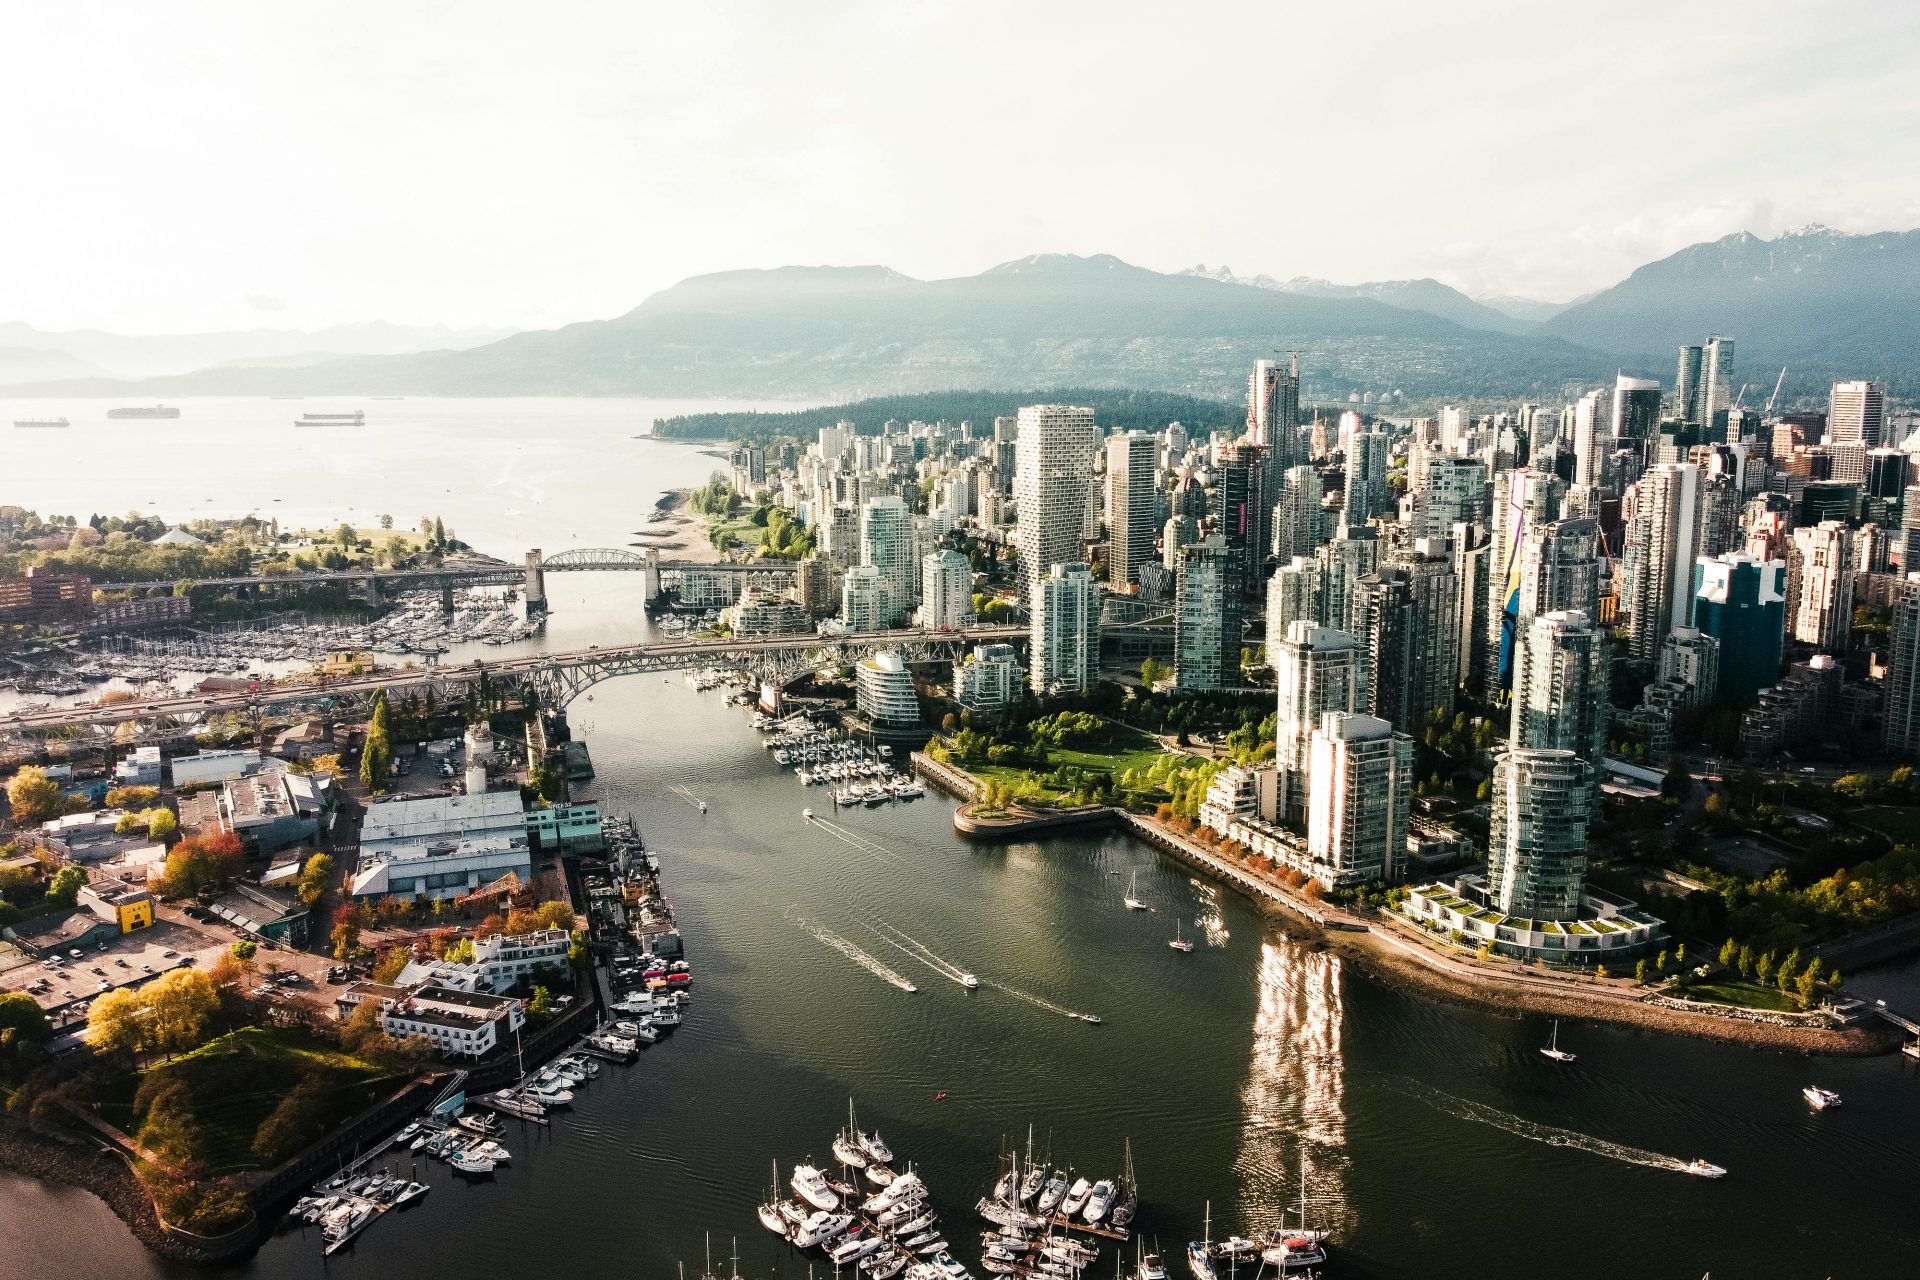 3rd wost: Vancouver, Canada 